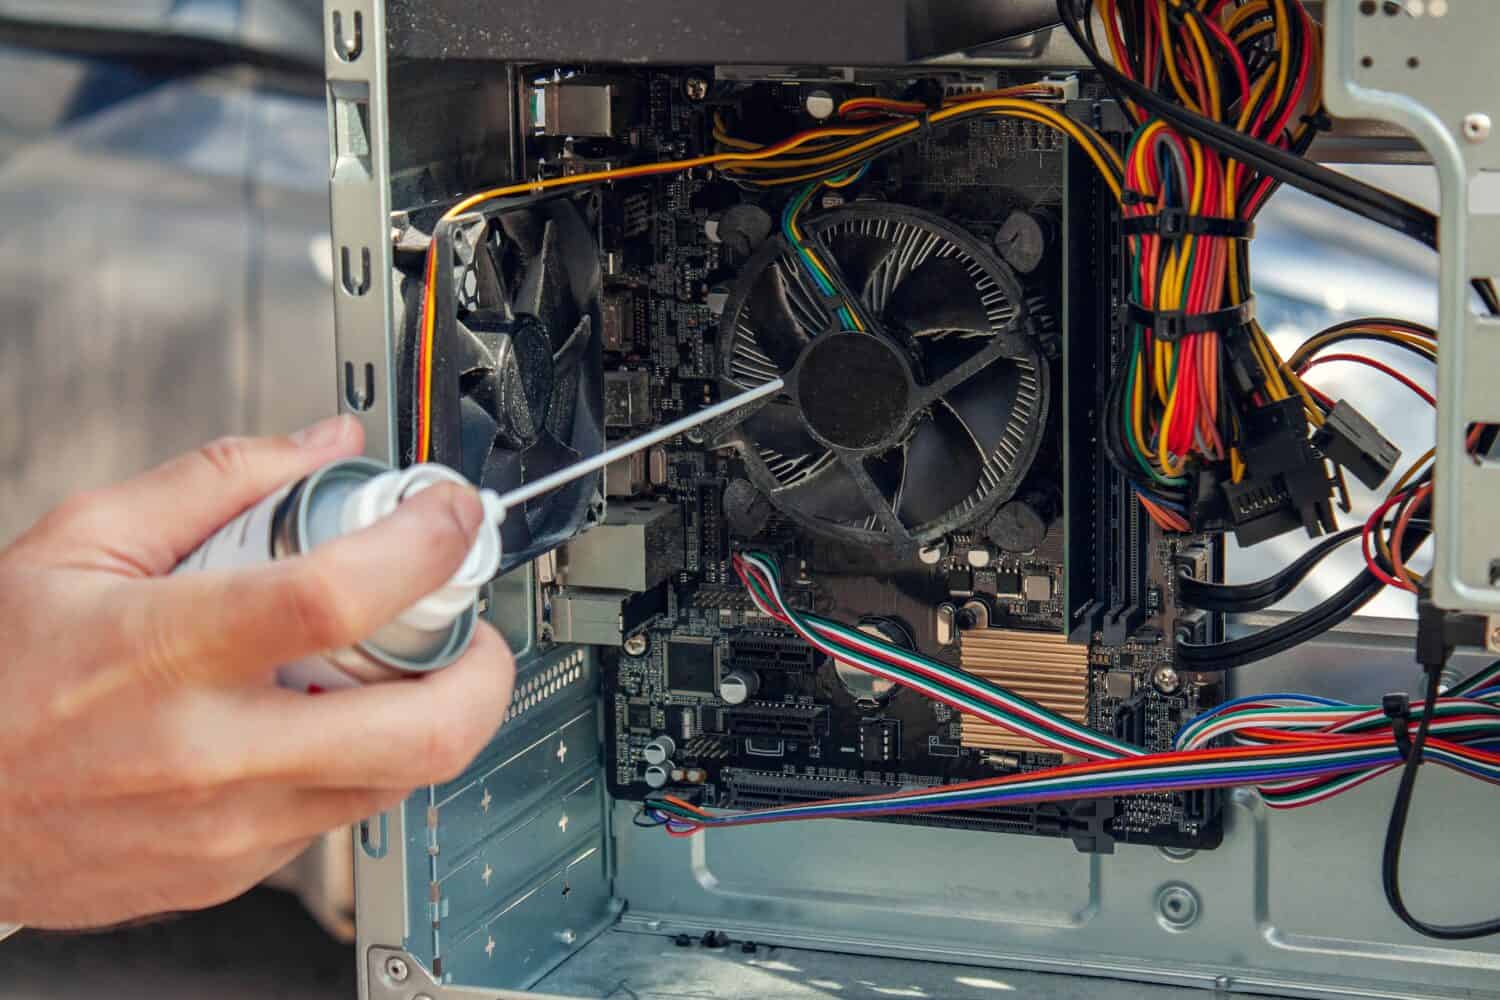 Maintenance and cleaning of the insides of the computer. Man's hand holds a cylinder of compressed air and cleans the insides of the computer.